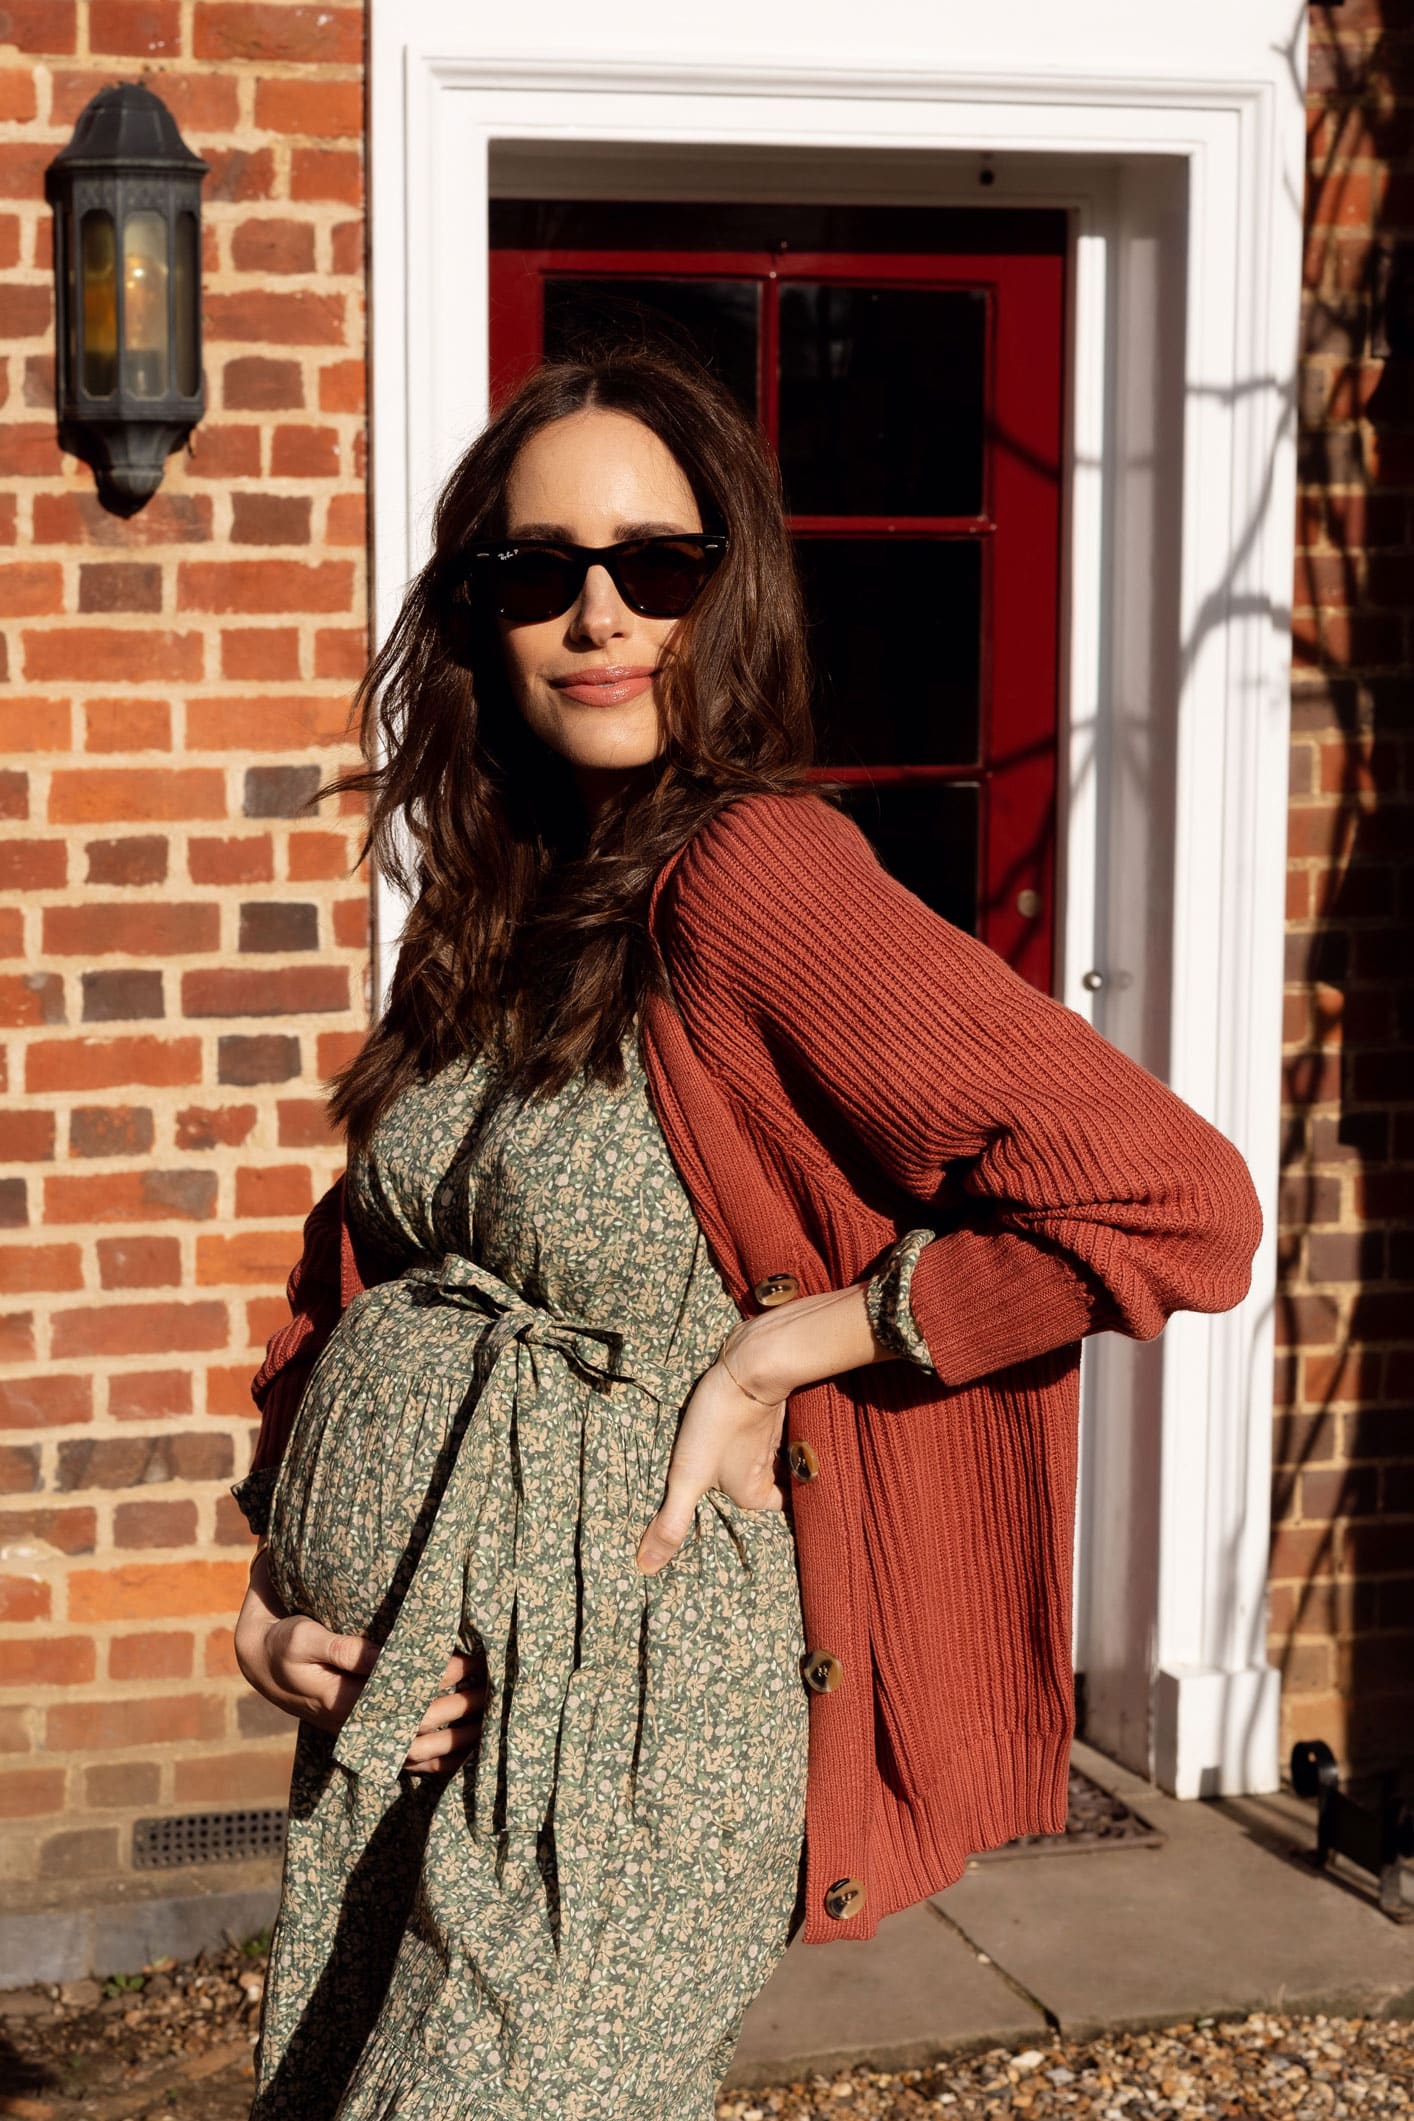 Louise Roe chooses spring fashion pieces